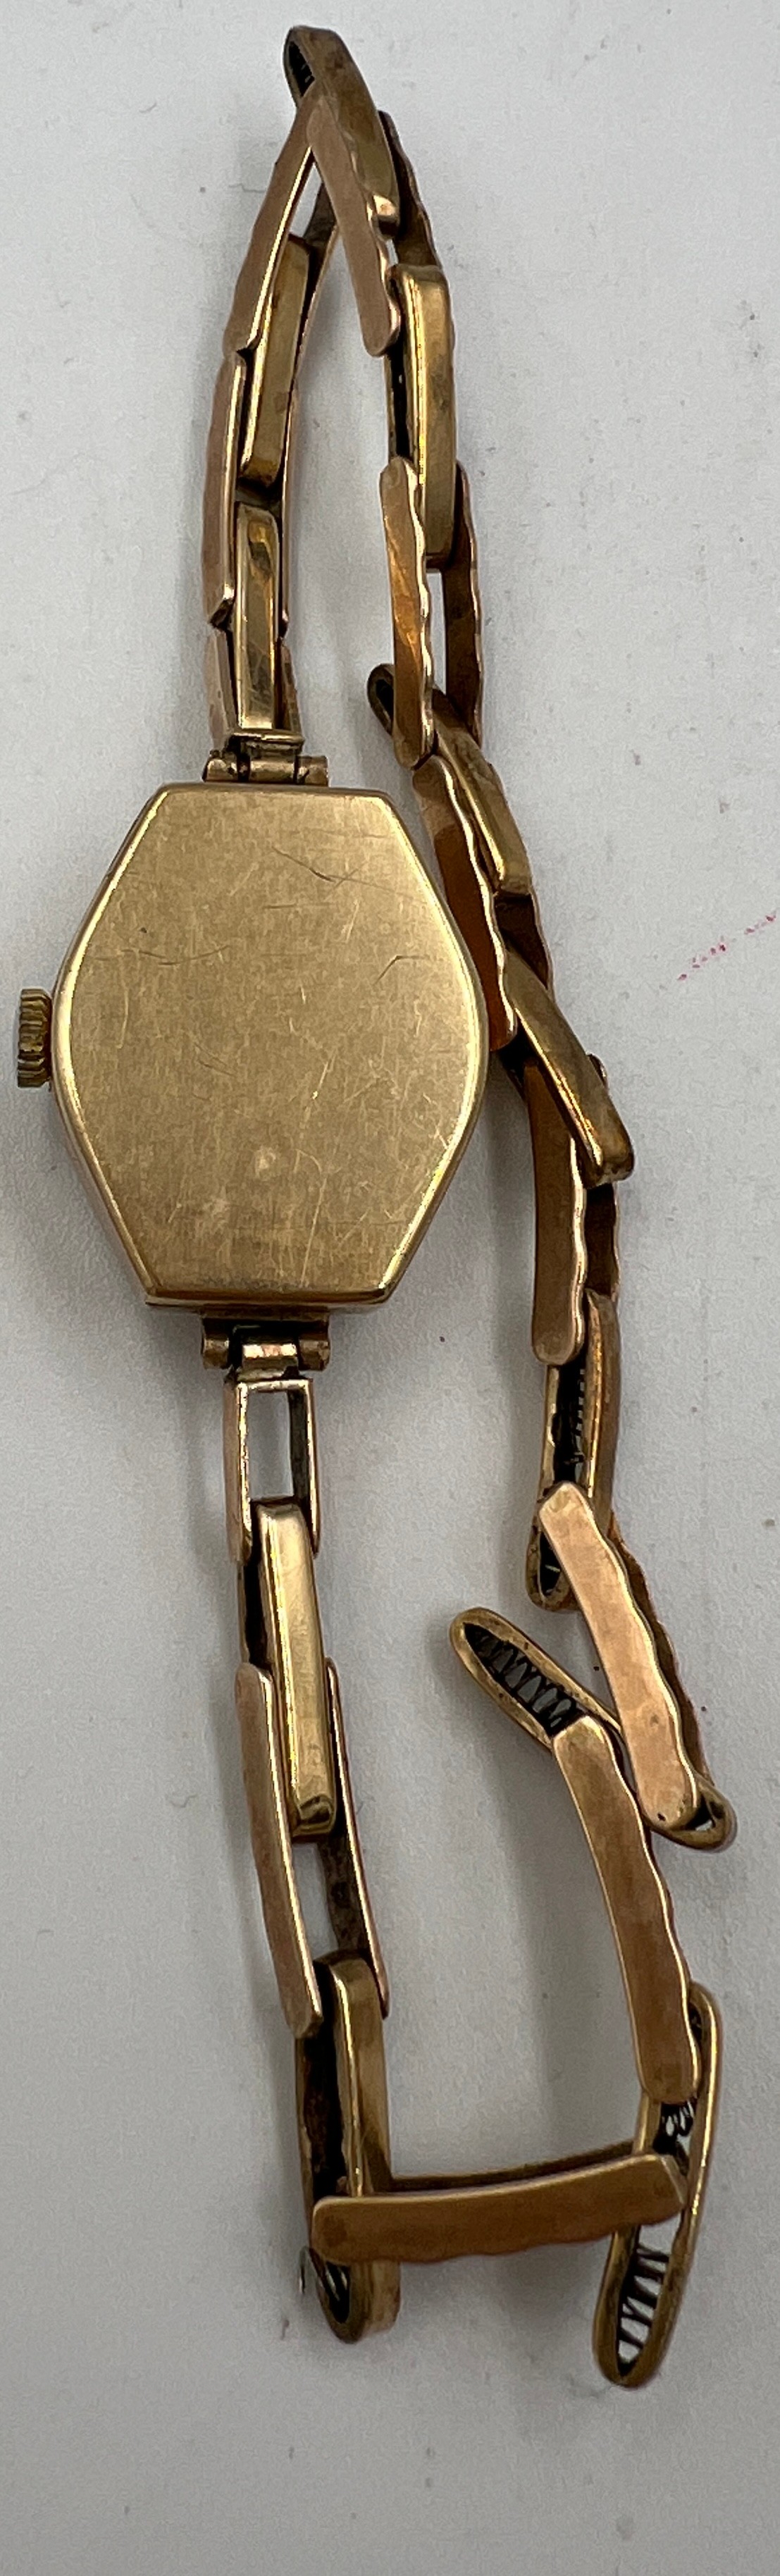 A 9 carat gold ladies Rotary wristwatch with 9 carat gold expanding bracelet. Total weight 13.6gm. - Image 2 of 3